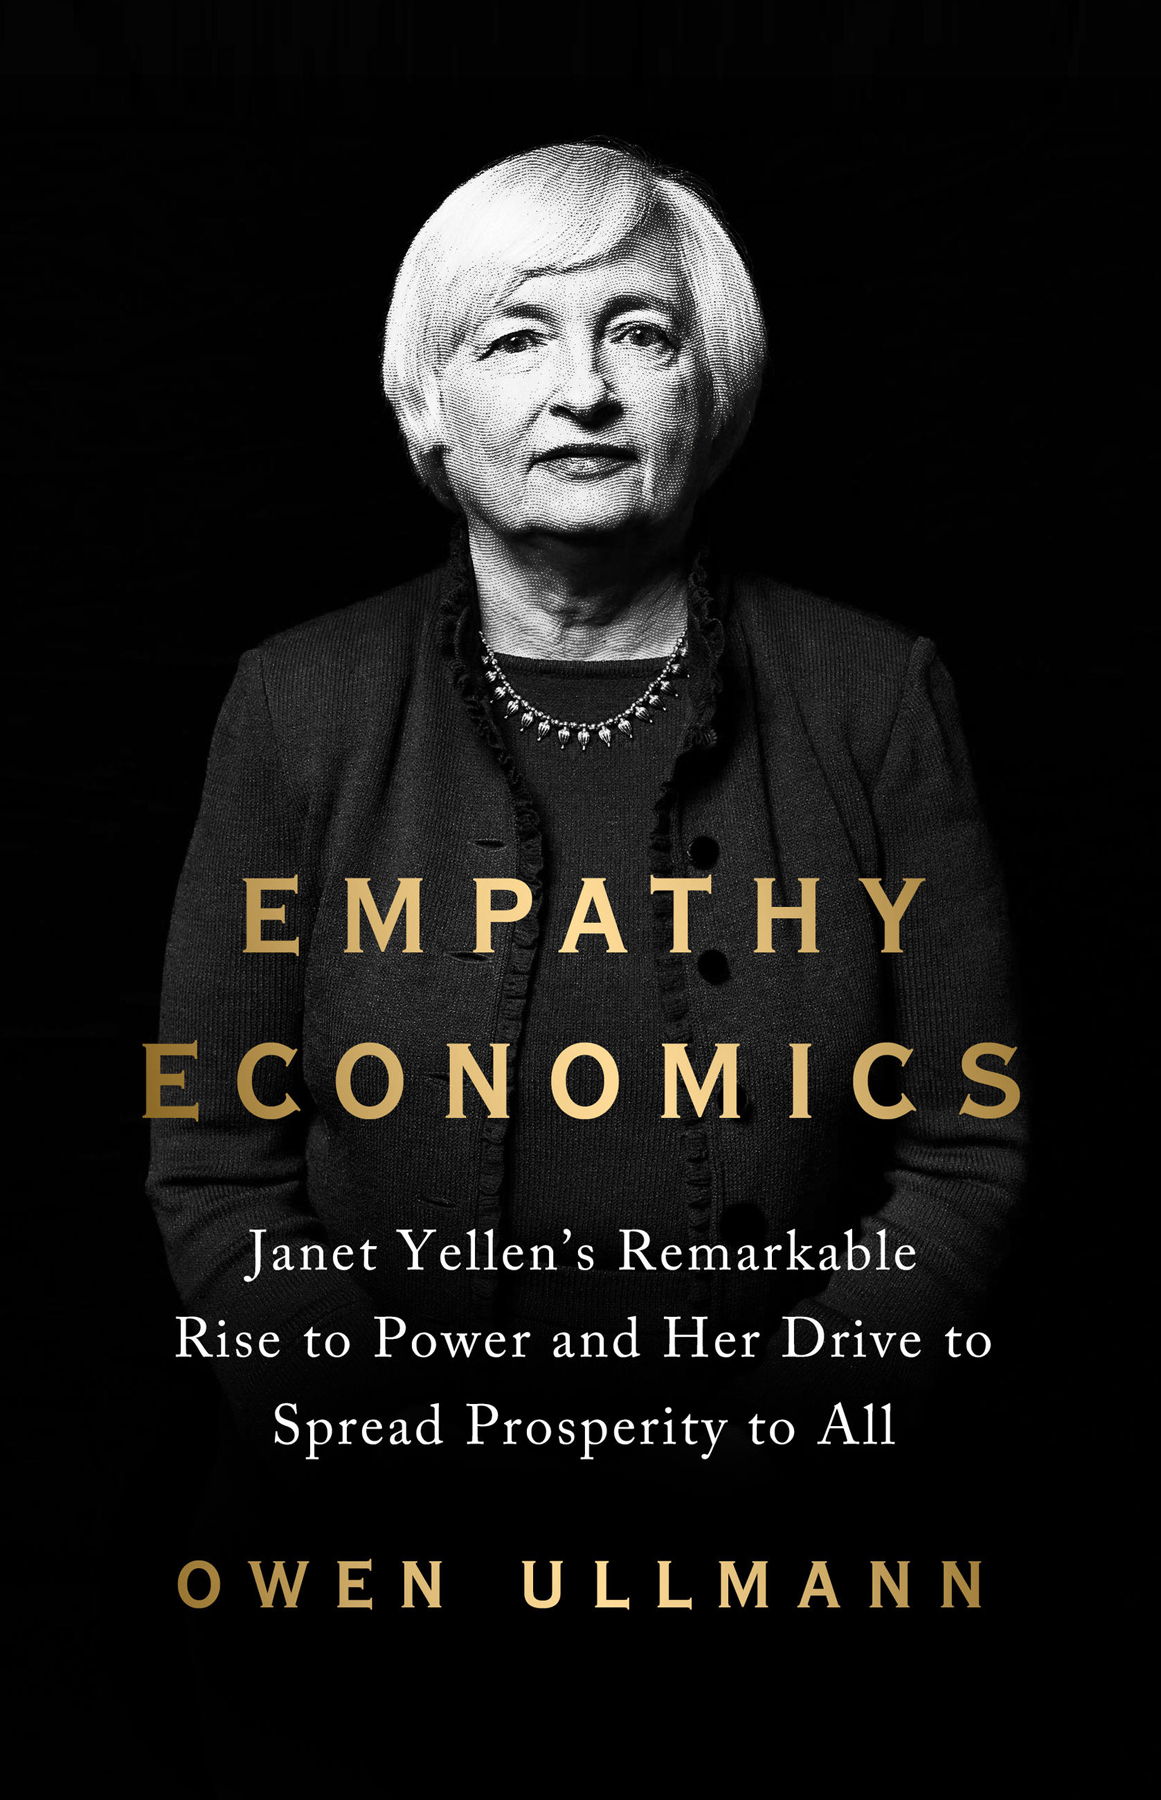 With extraordinary access to an extremely busy Janet Yellen as well her family - photo 1